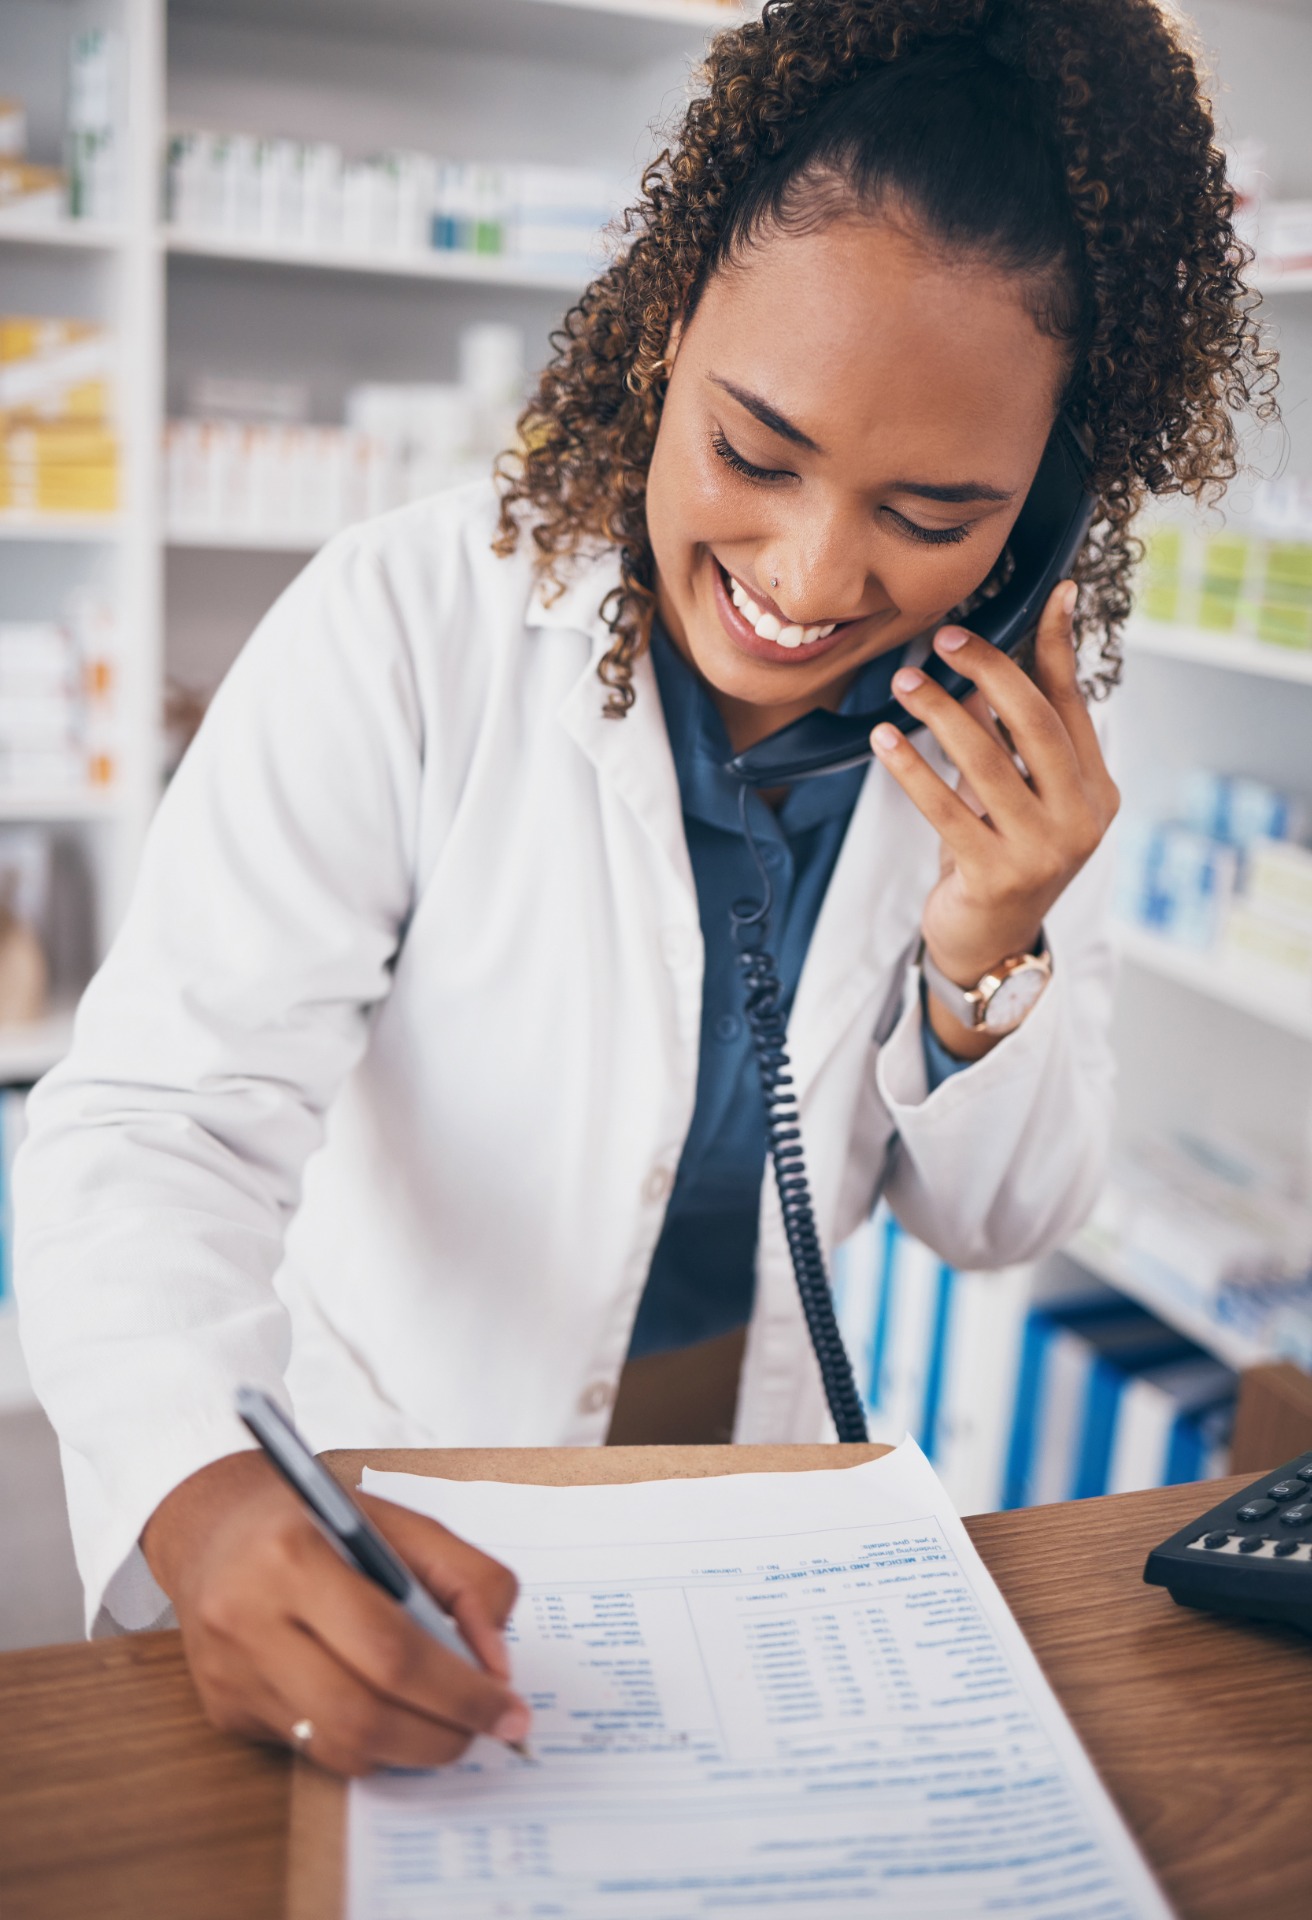 Female pharmacist smiling and on the phone while writing something on a clipboard